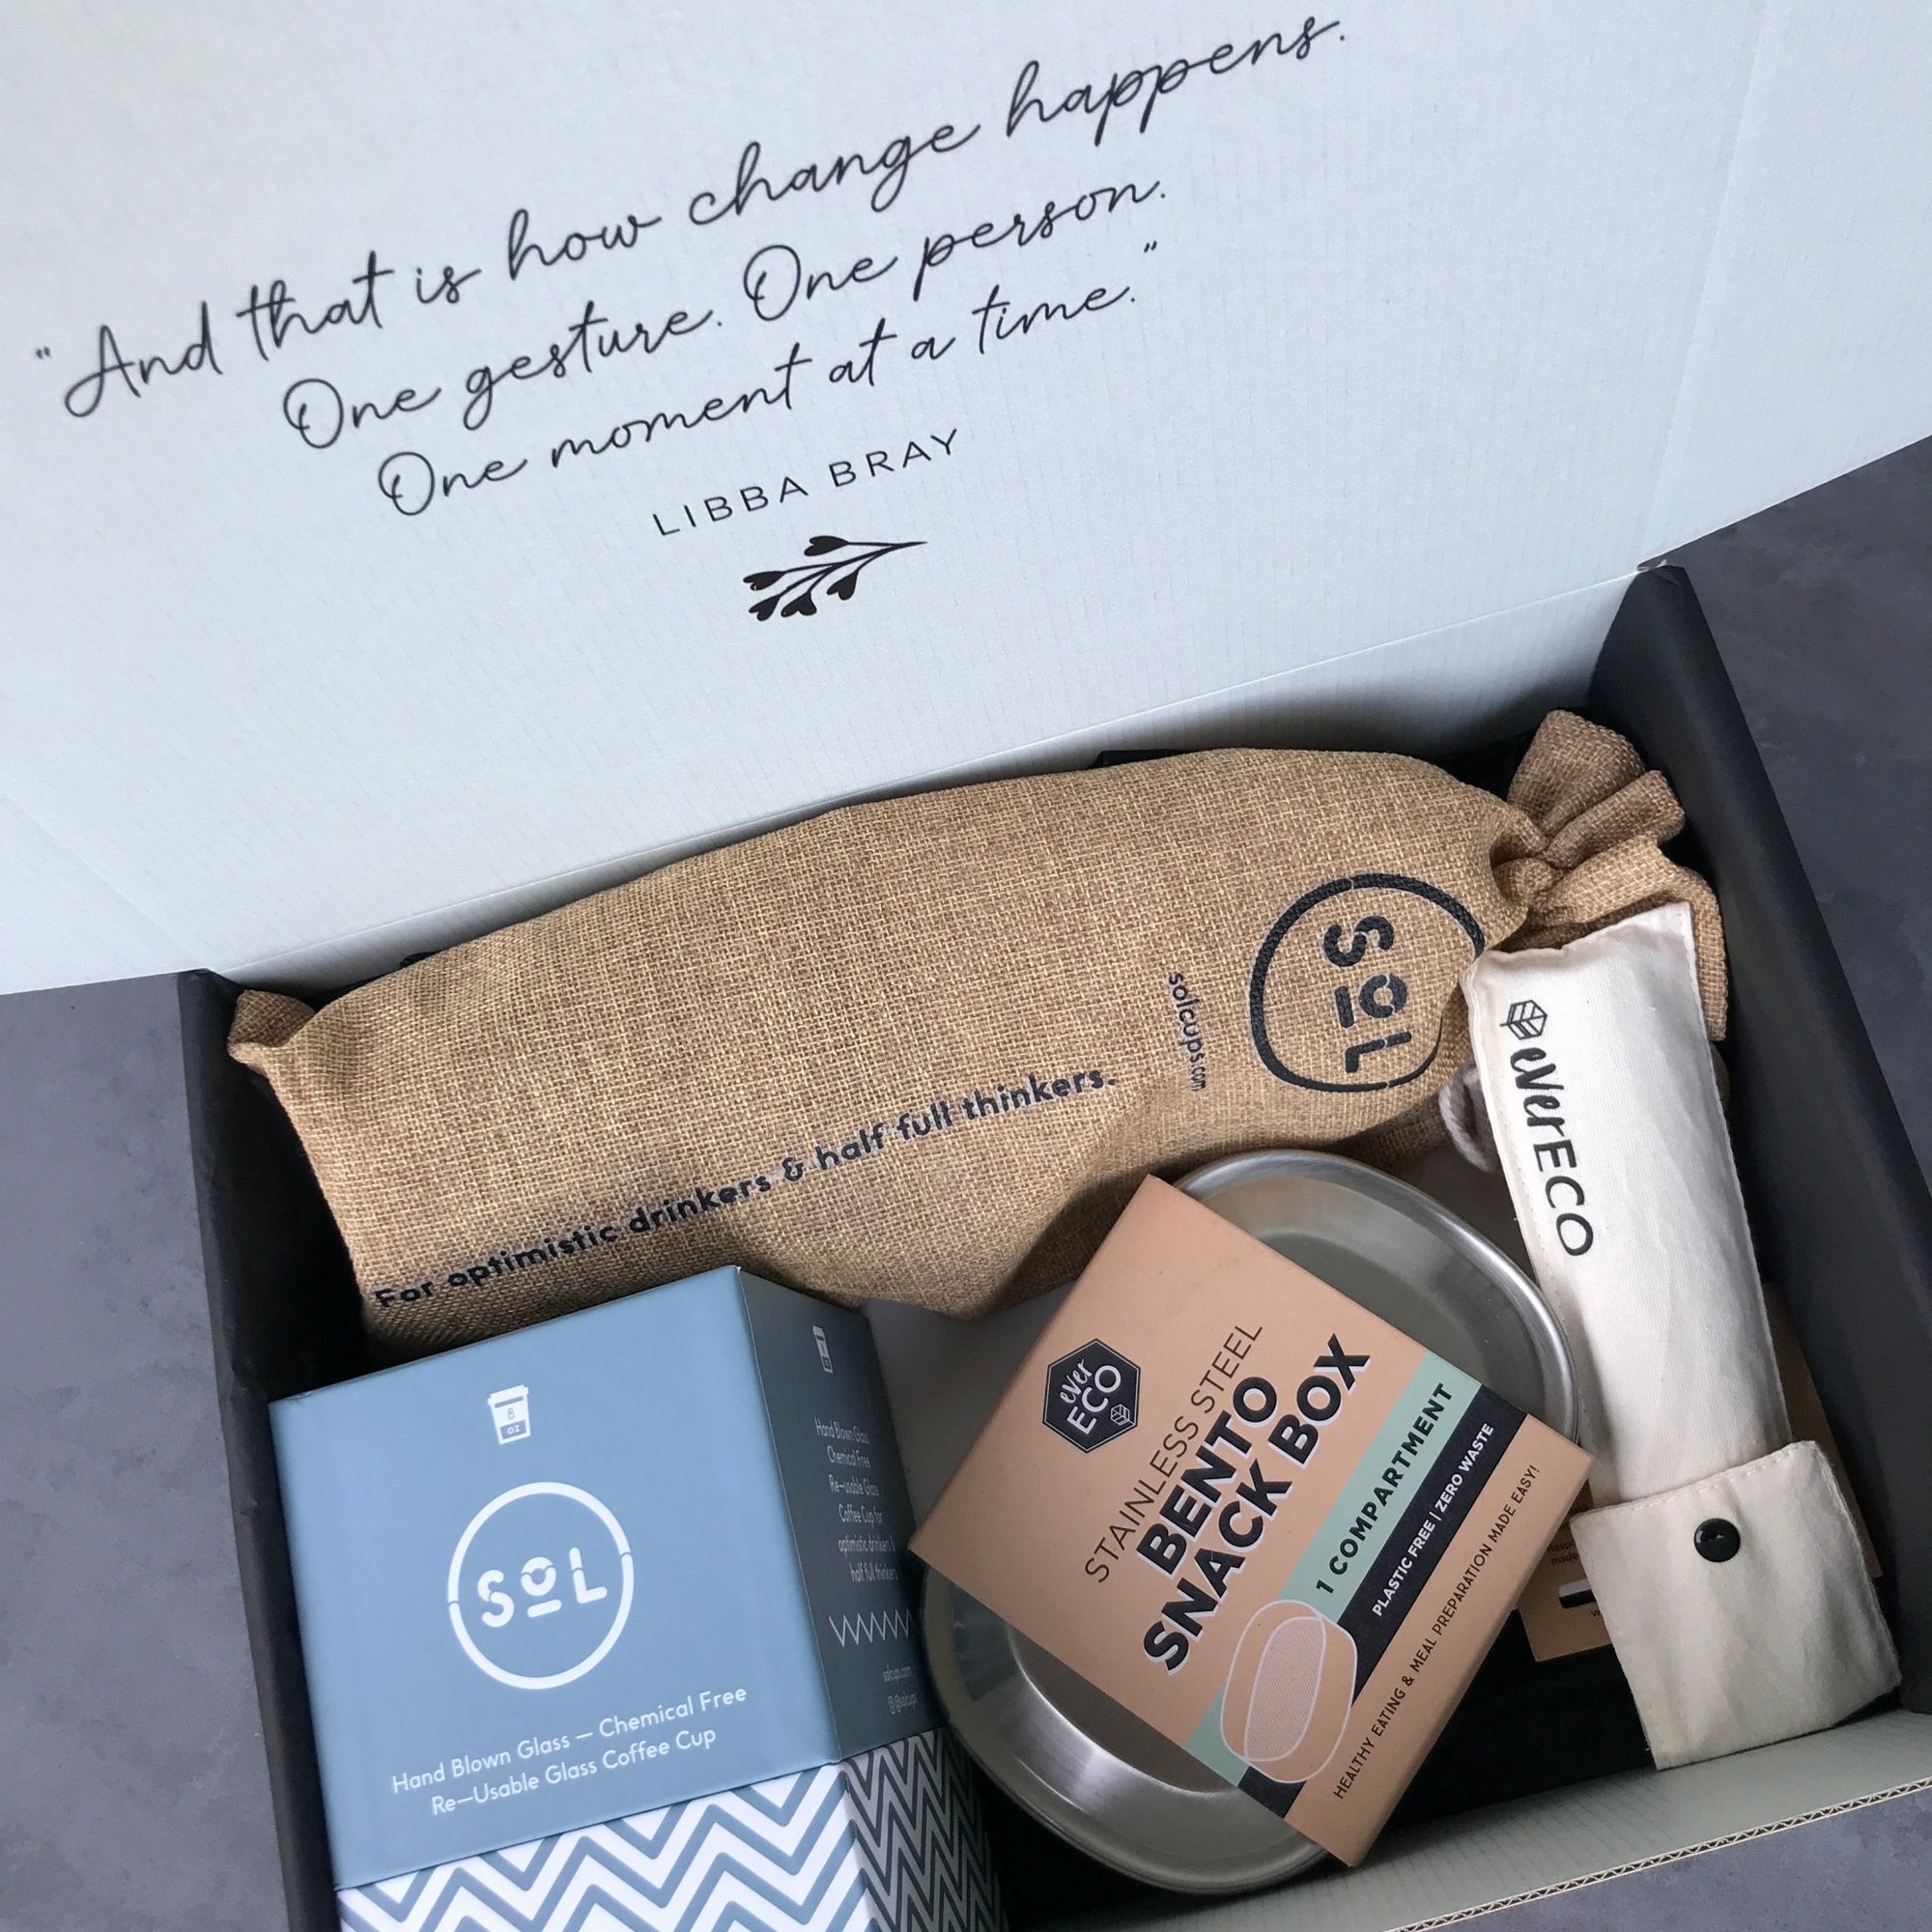 5 Eco-Friendly Gift Ideas to Promote Sustainability in the Workplace - Everybody Loves Hampers